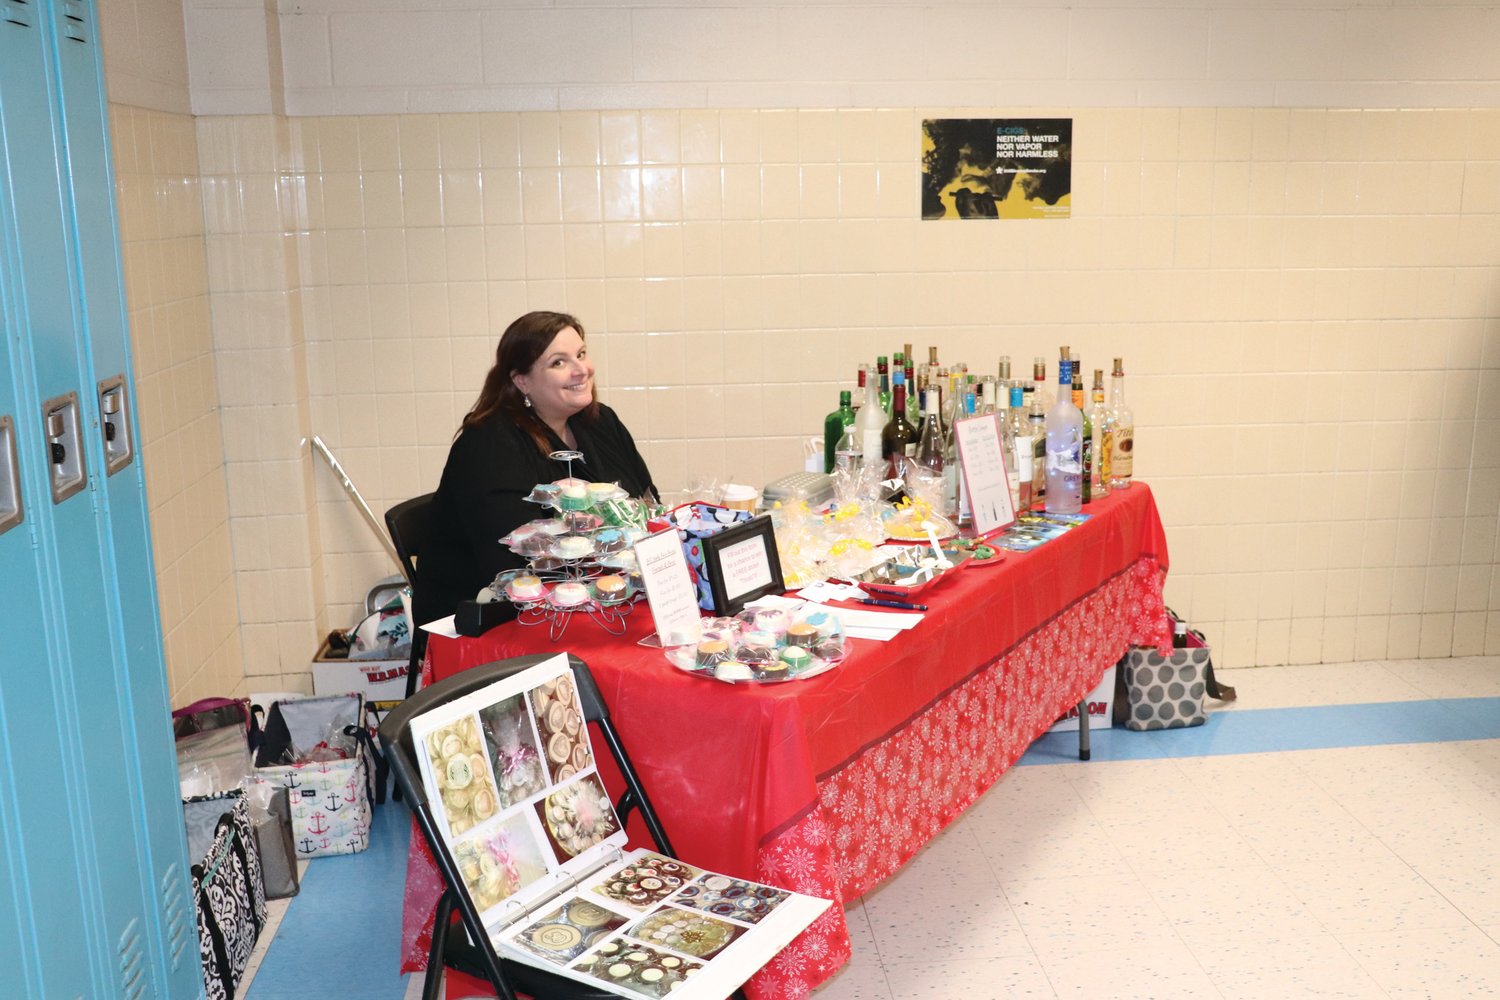 BARGAINS AND BOTTLES: That would be the theme of tomorrow’s 10th annual JHS-PTSO Holly Fair that will run from 9 a.m. to 4 p.m. inside Johnston High School.